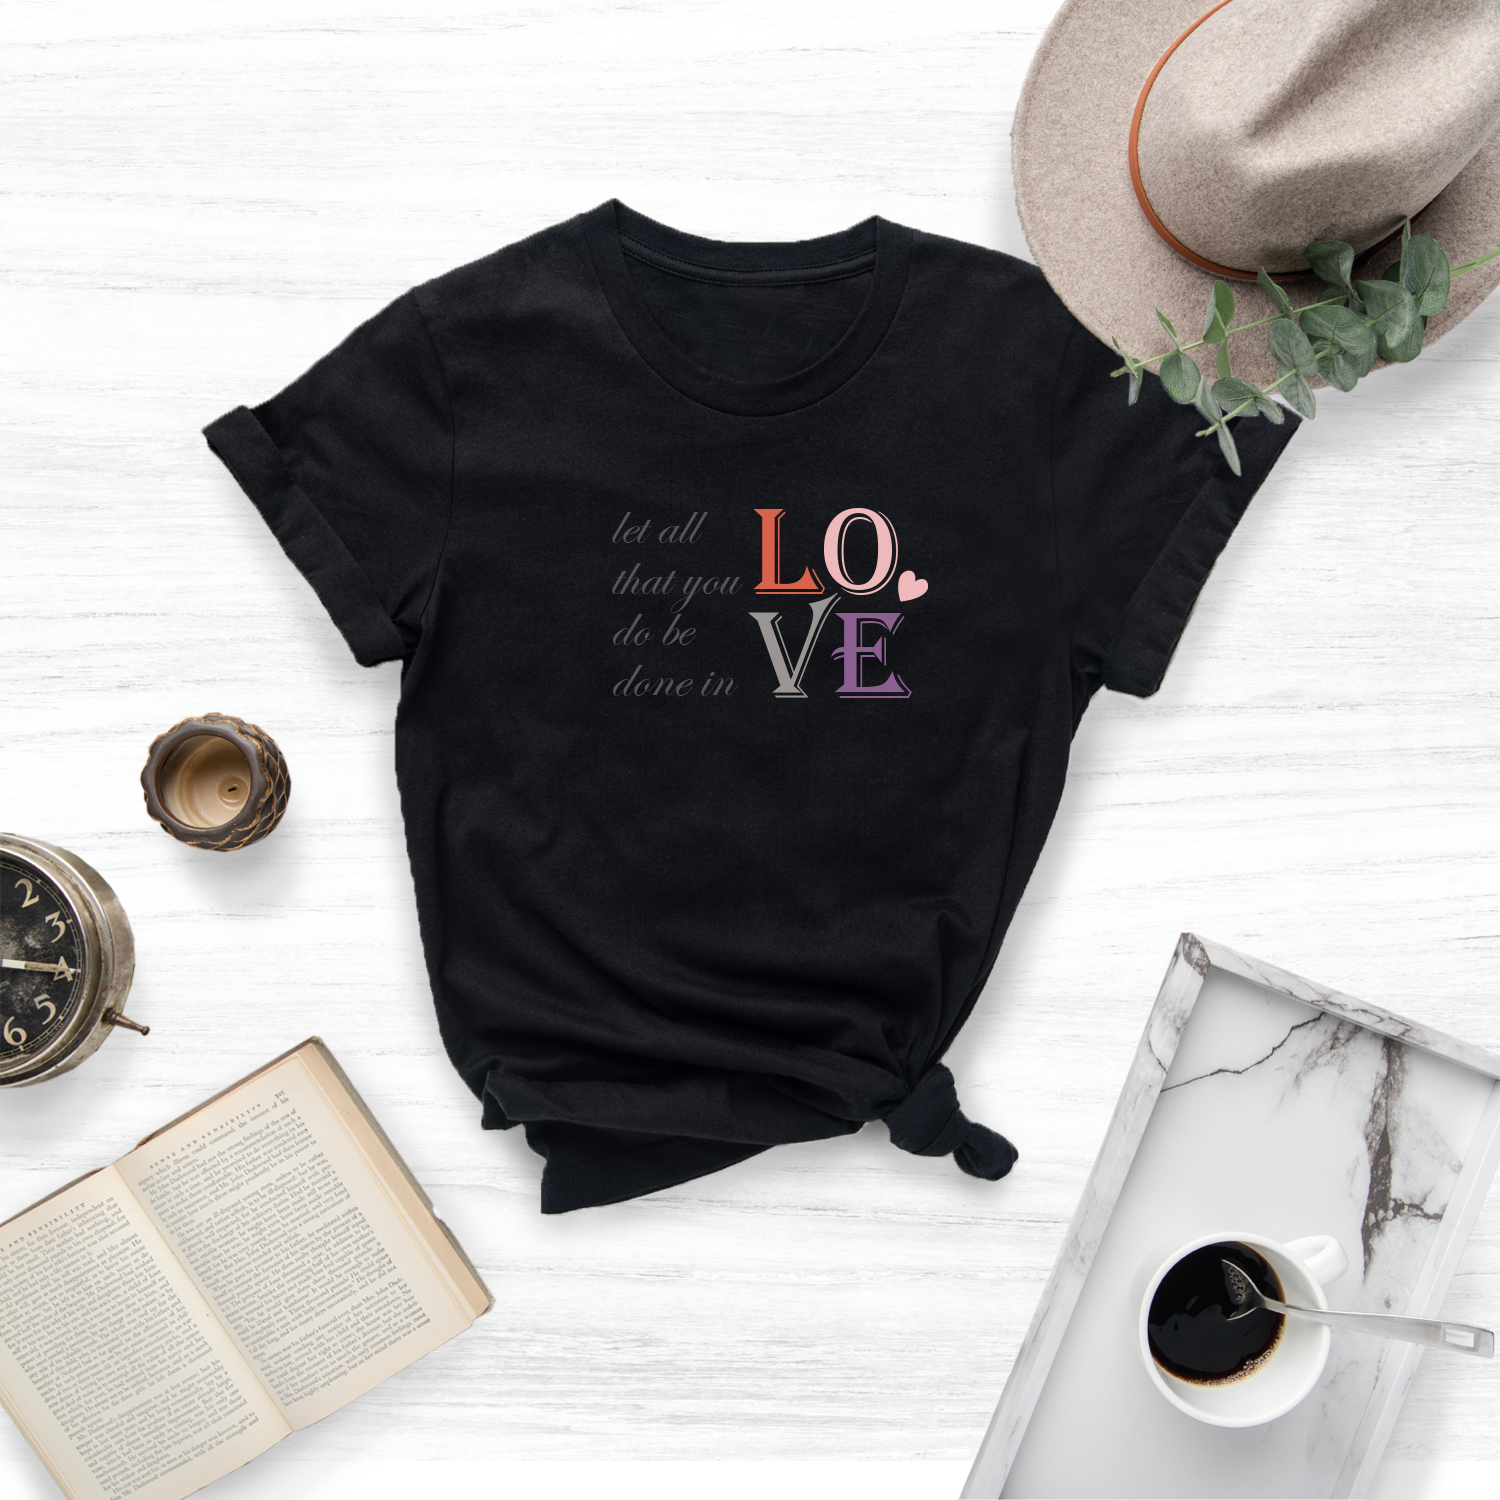 Show your love this Valentine's Day with this stylish and feminine graphic tee.